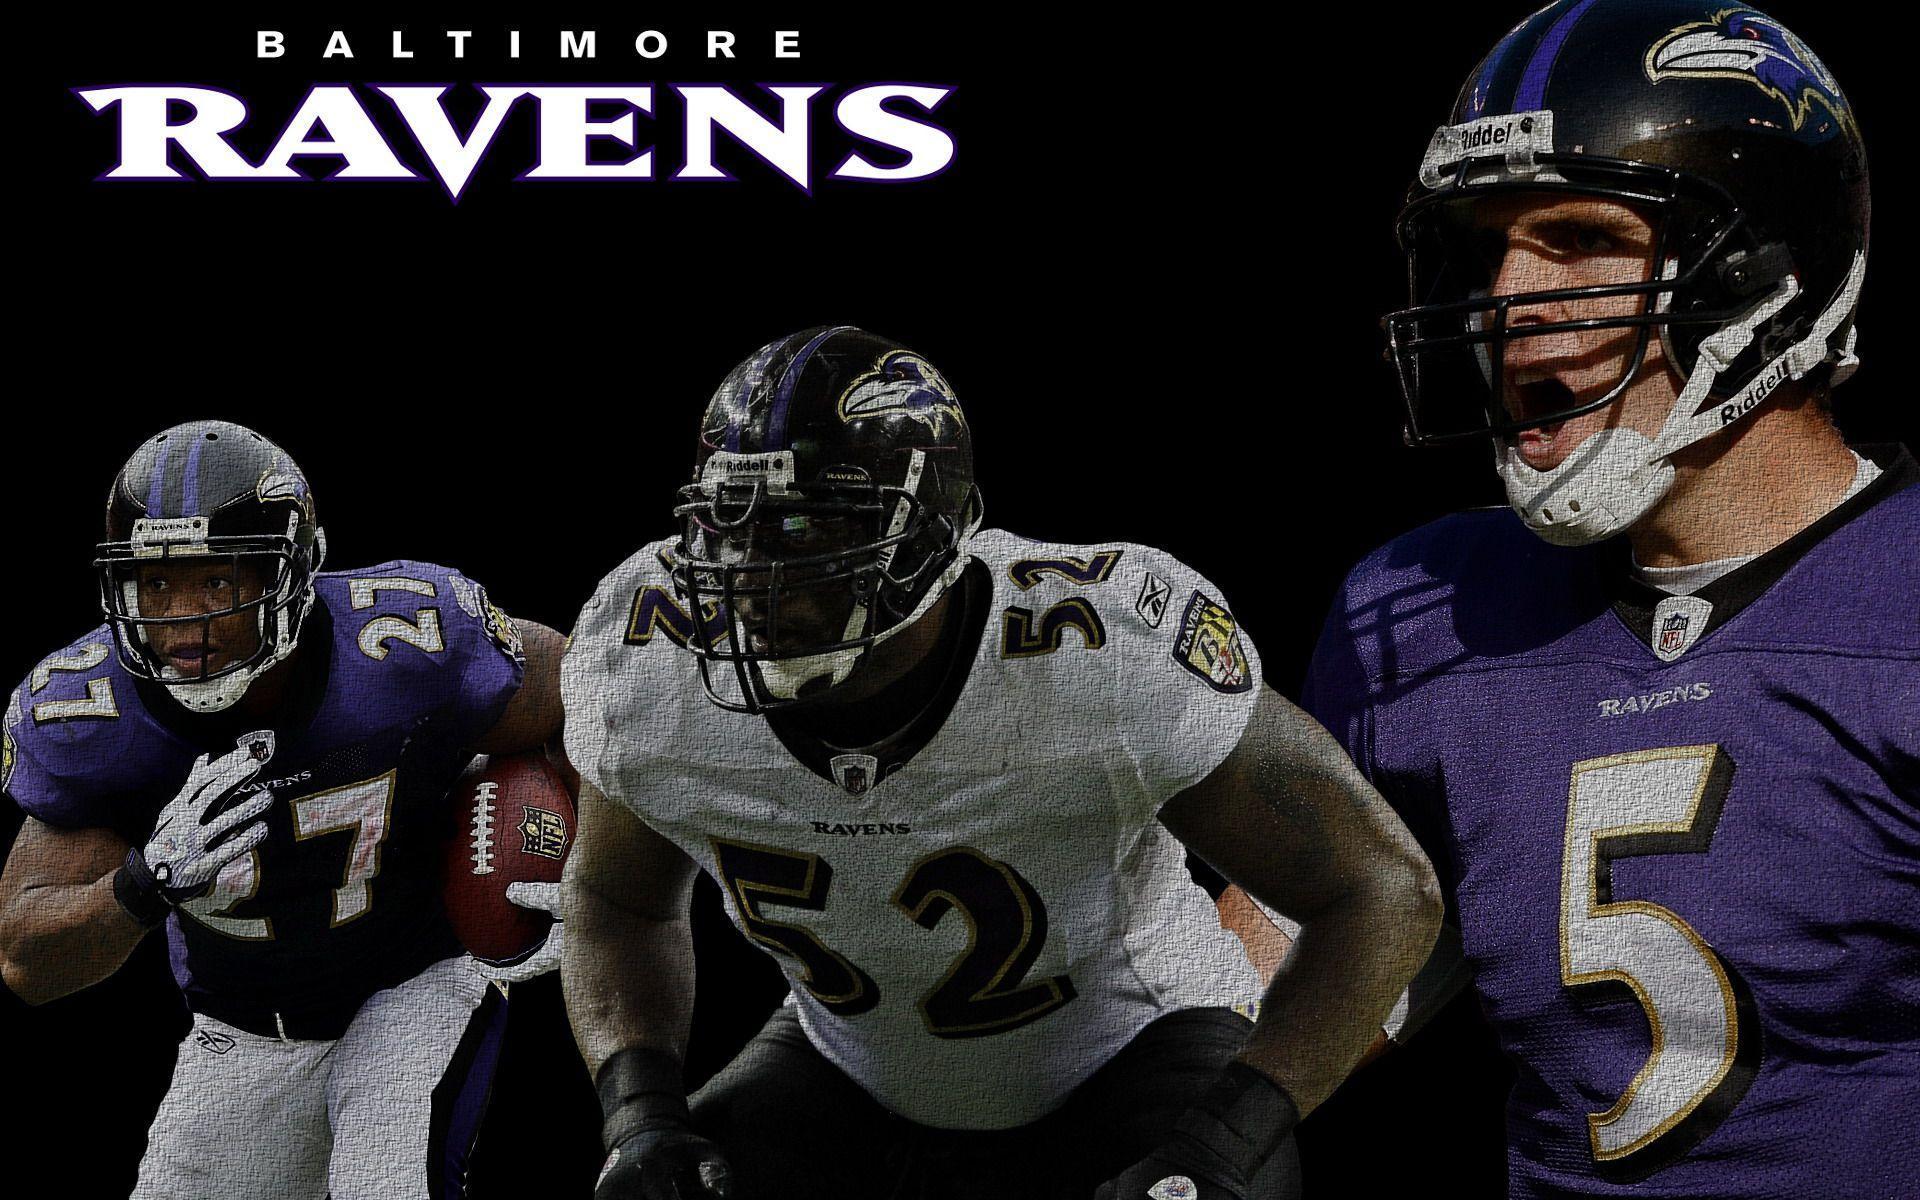 Check this out! our new Baltimore Ravens wallpaper wallpaper